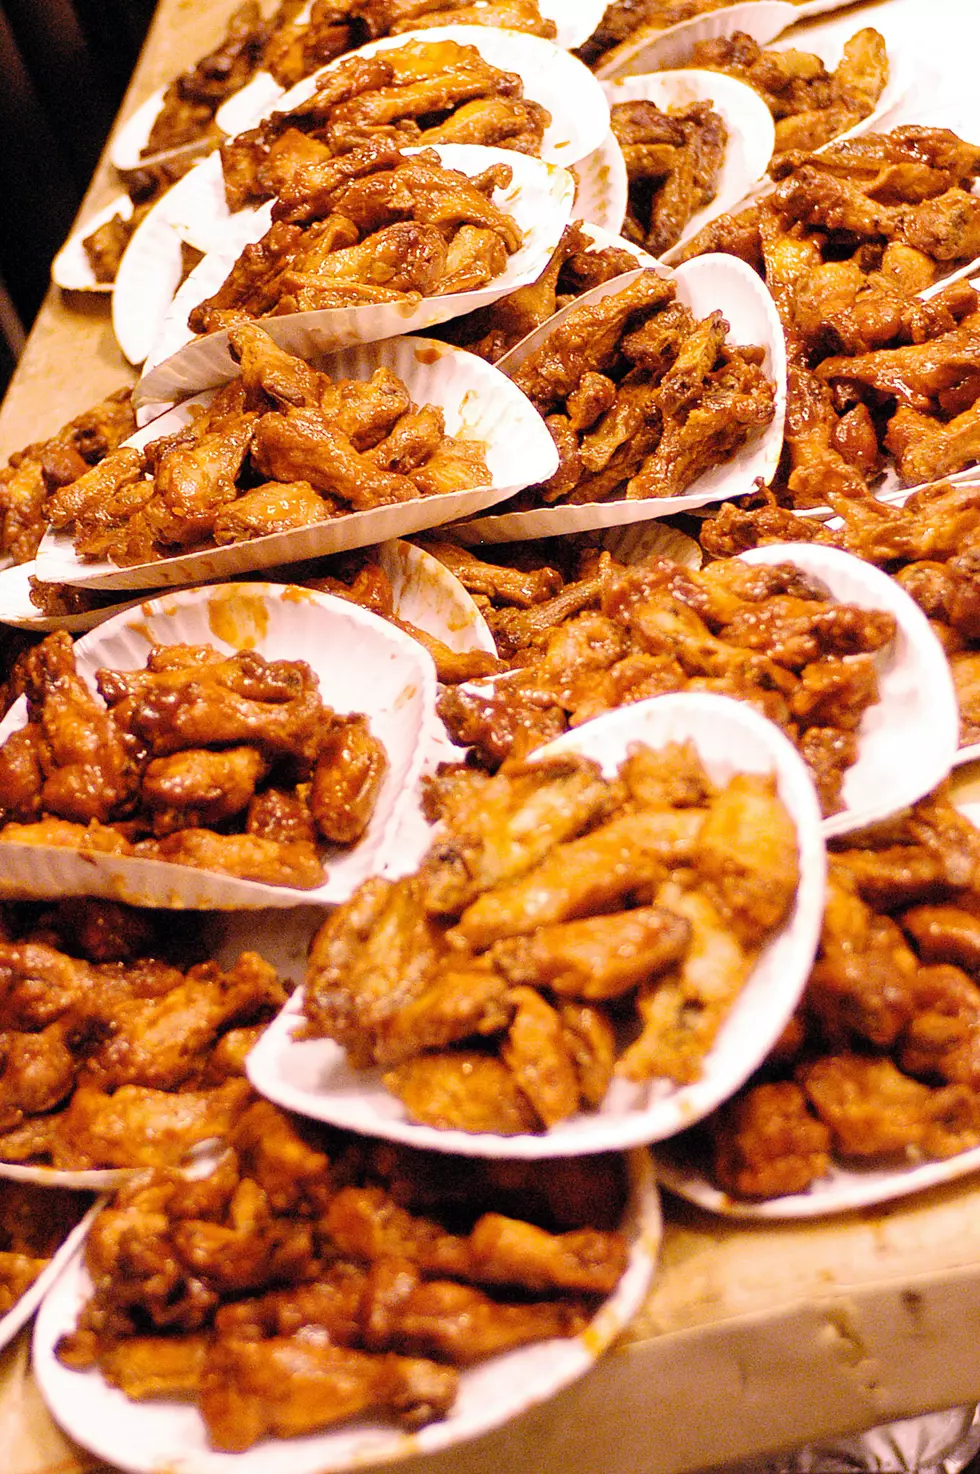 Hot Wing Contest [VIDEO]